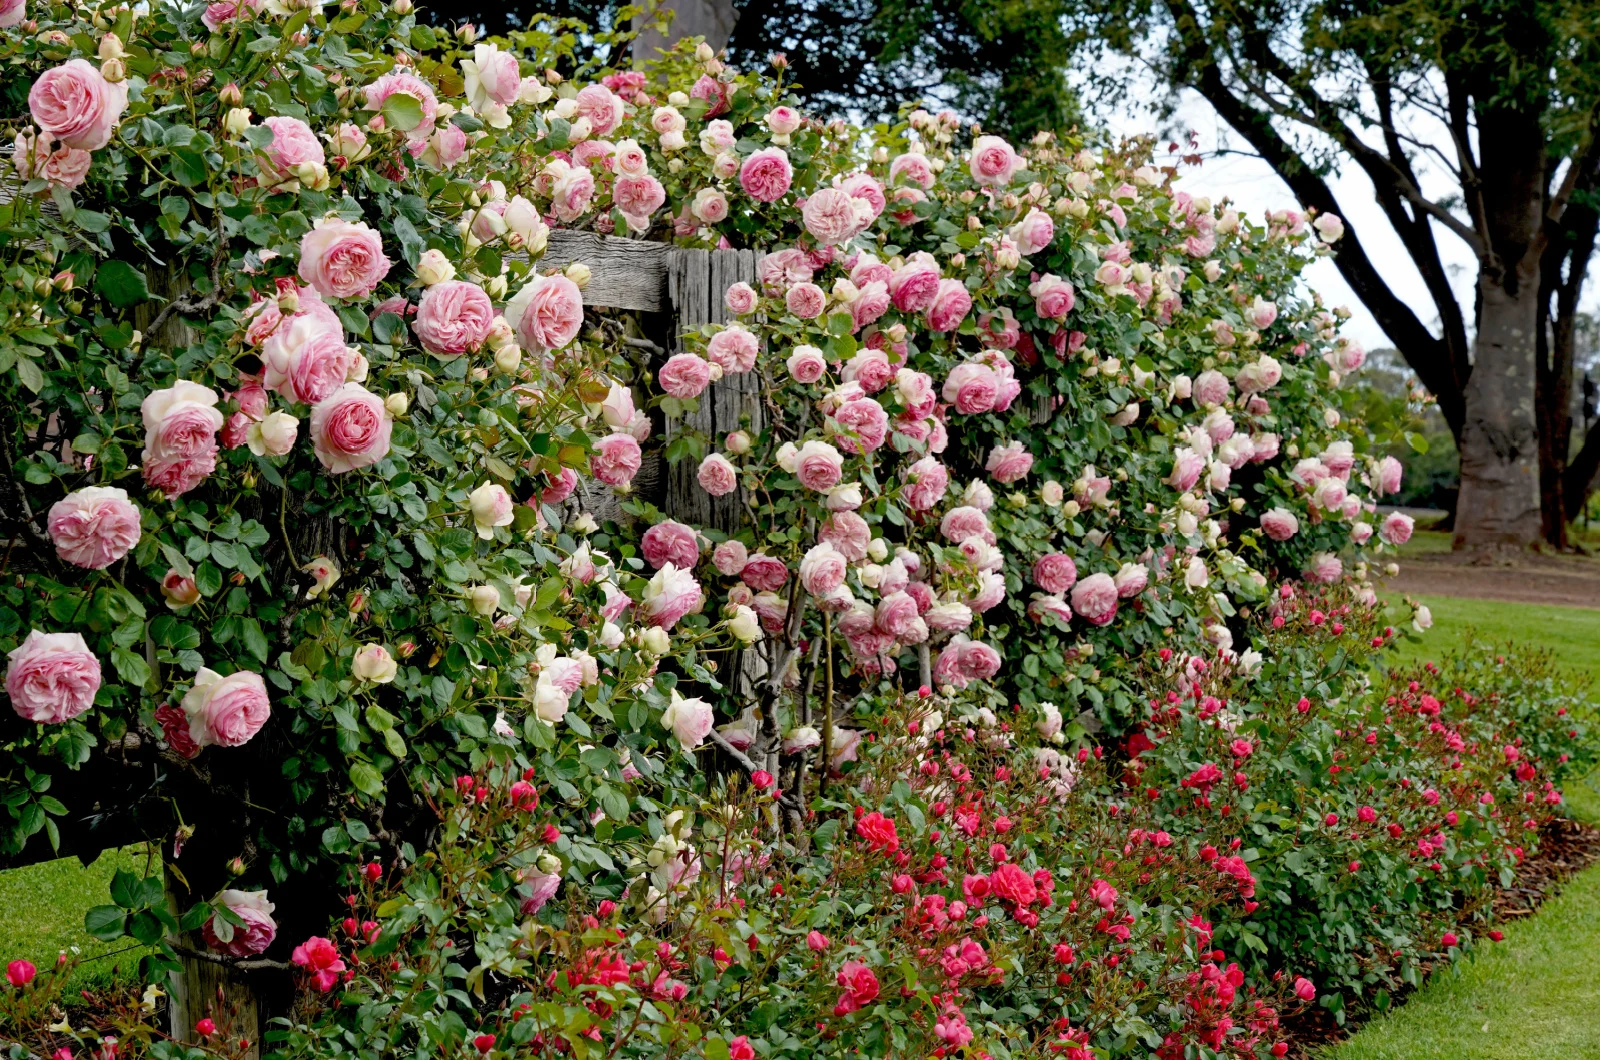 A beautiful climbing roses against a rustic wood fence